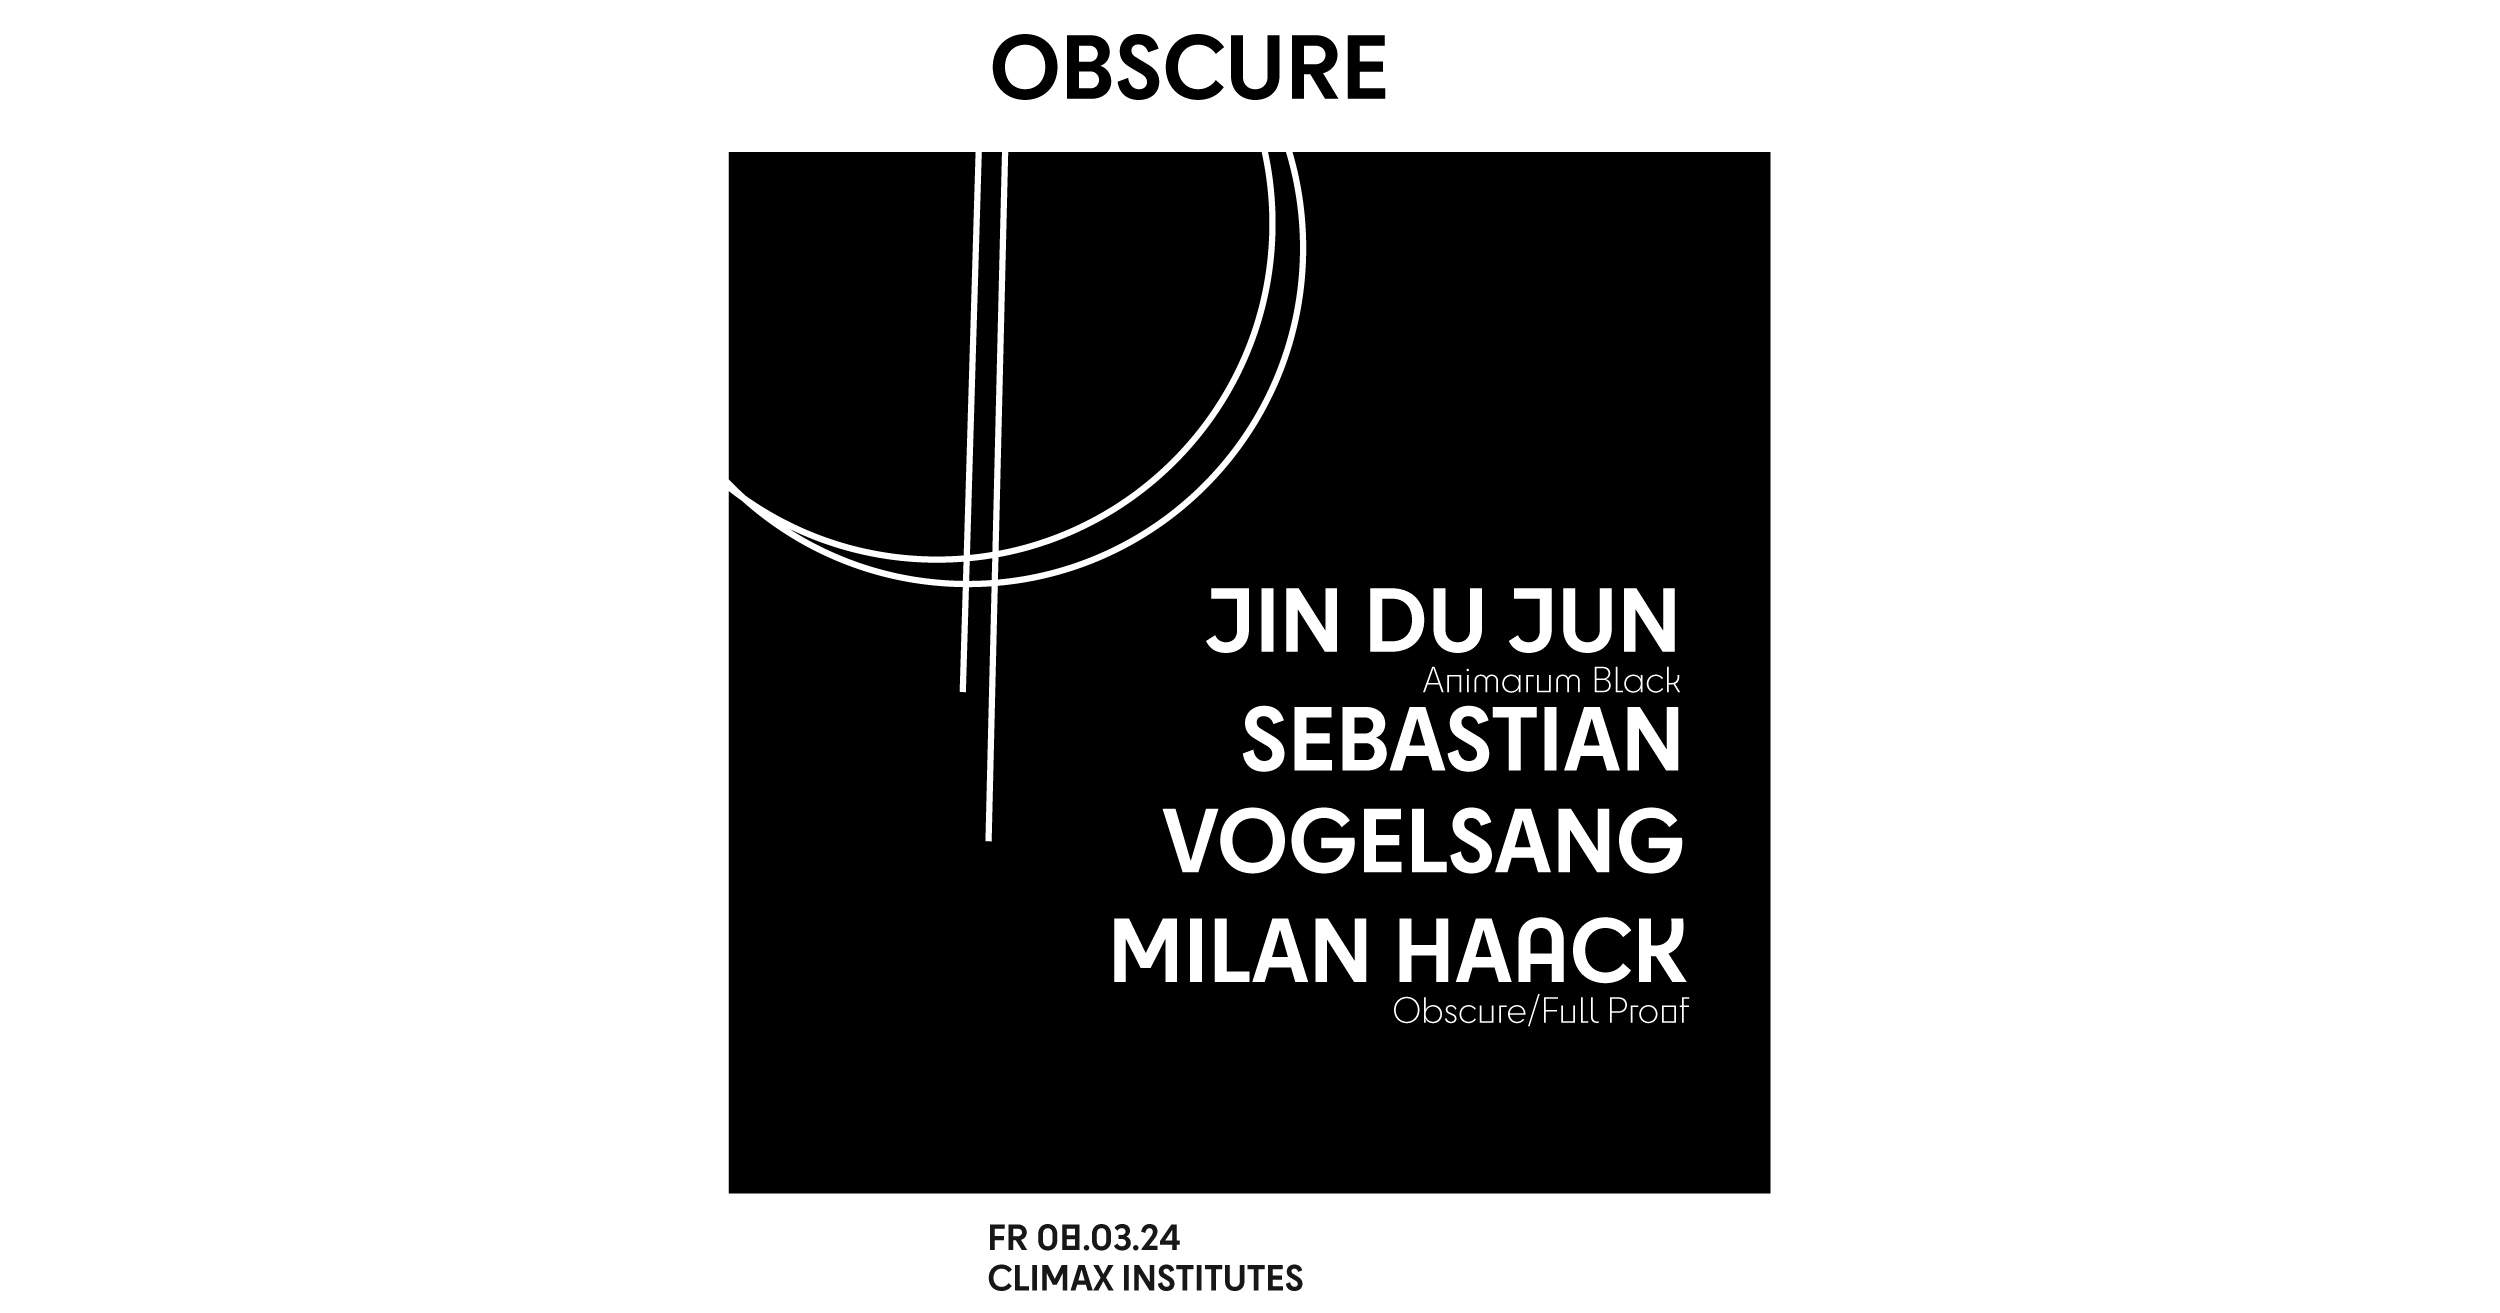 OBSCURE - フライヤー表